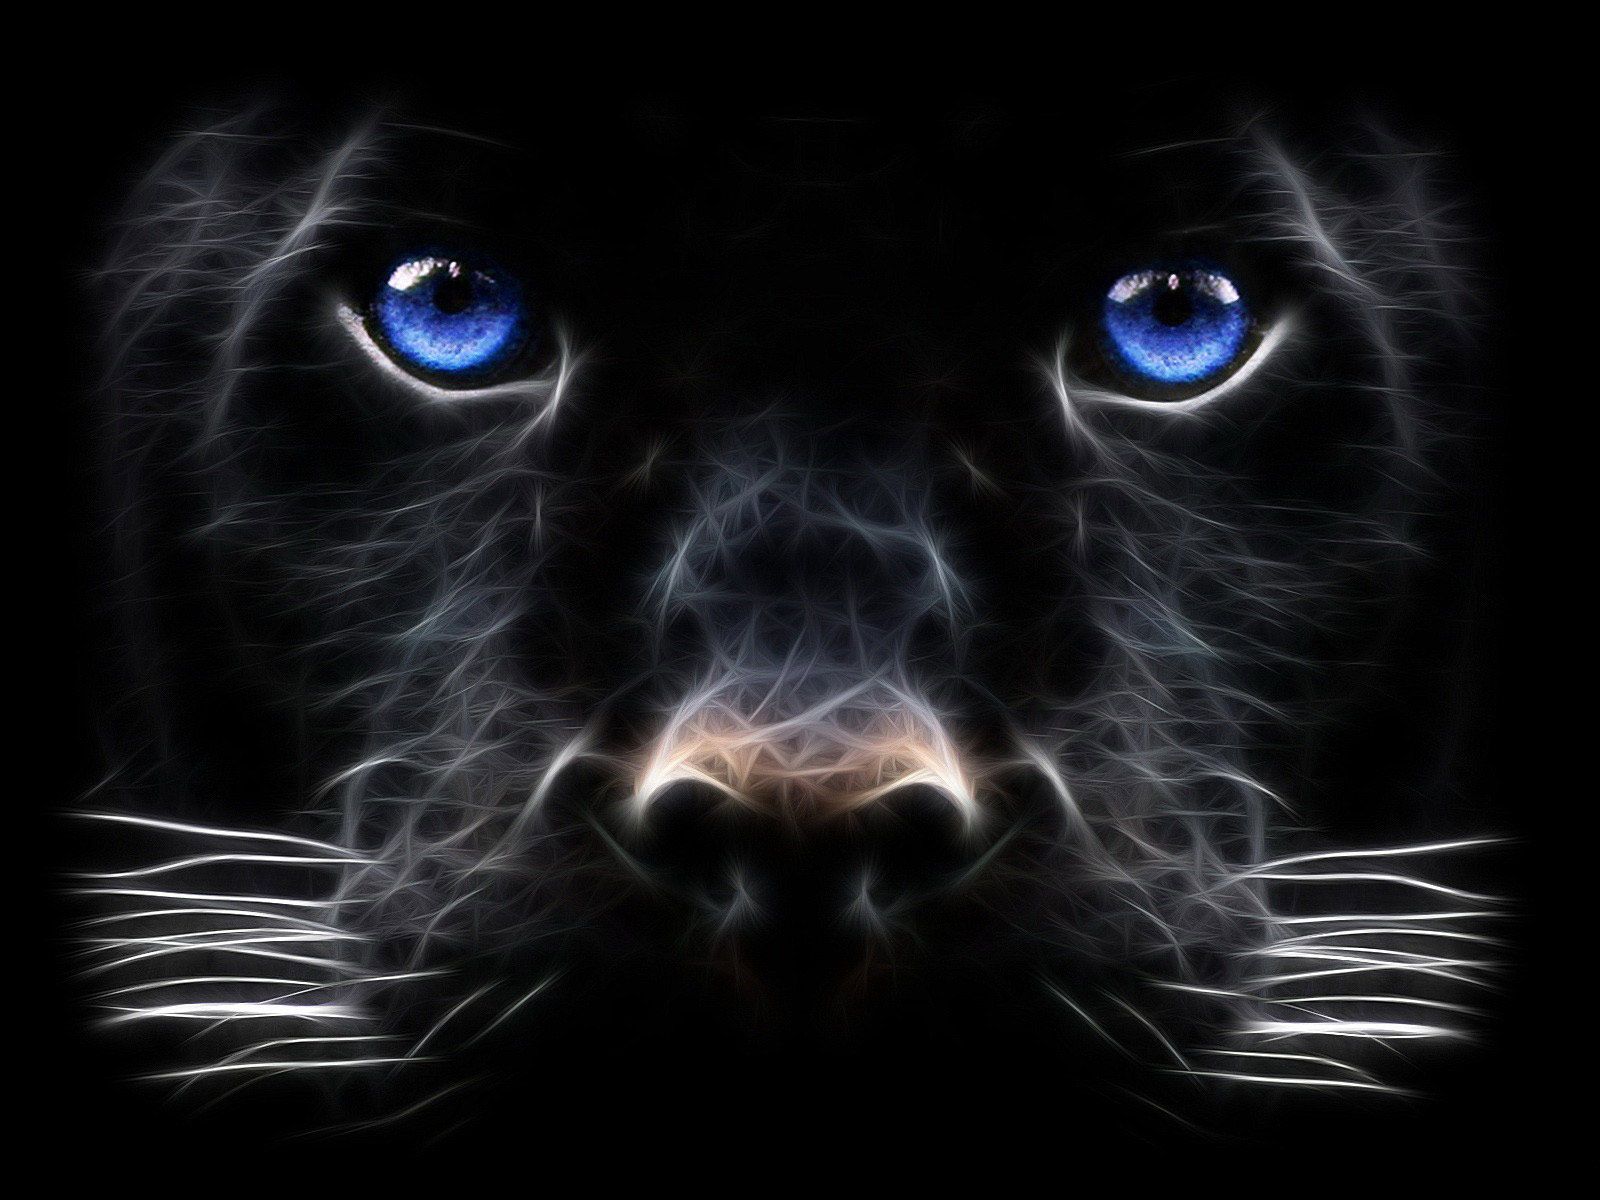 Animal Wallpapers For Desktop Computer Background - Black Panther Animal  With Blue Eyes - 1600x1200 Wallpaper 